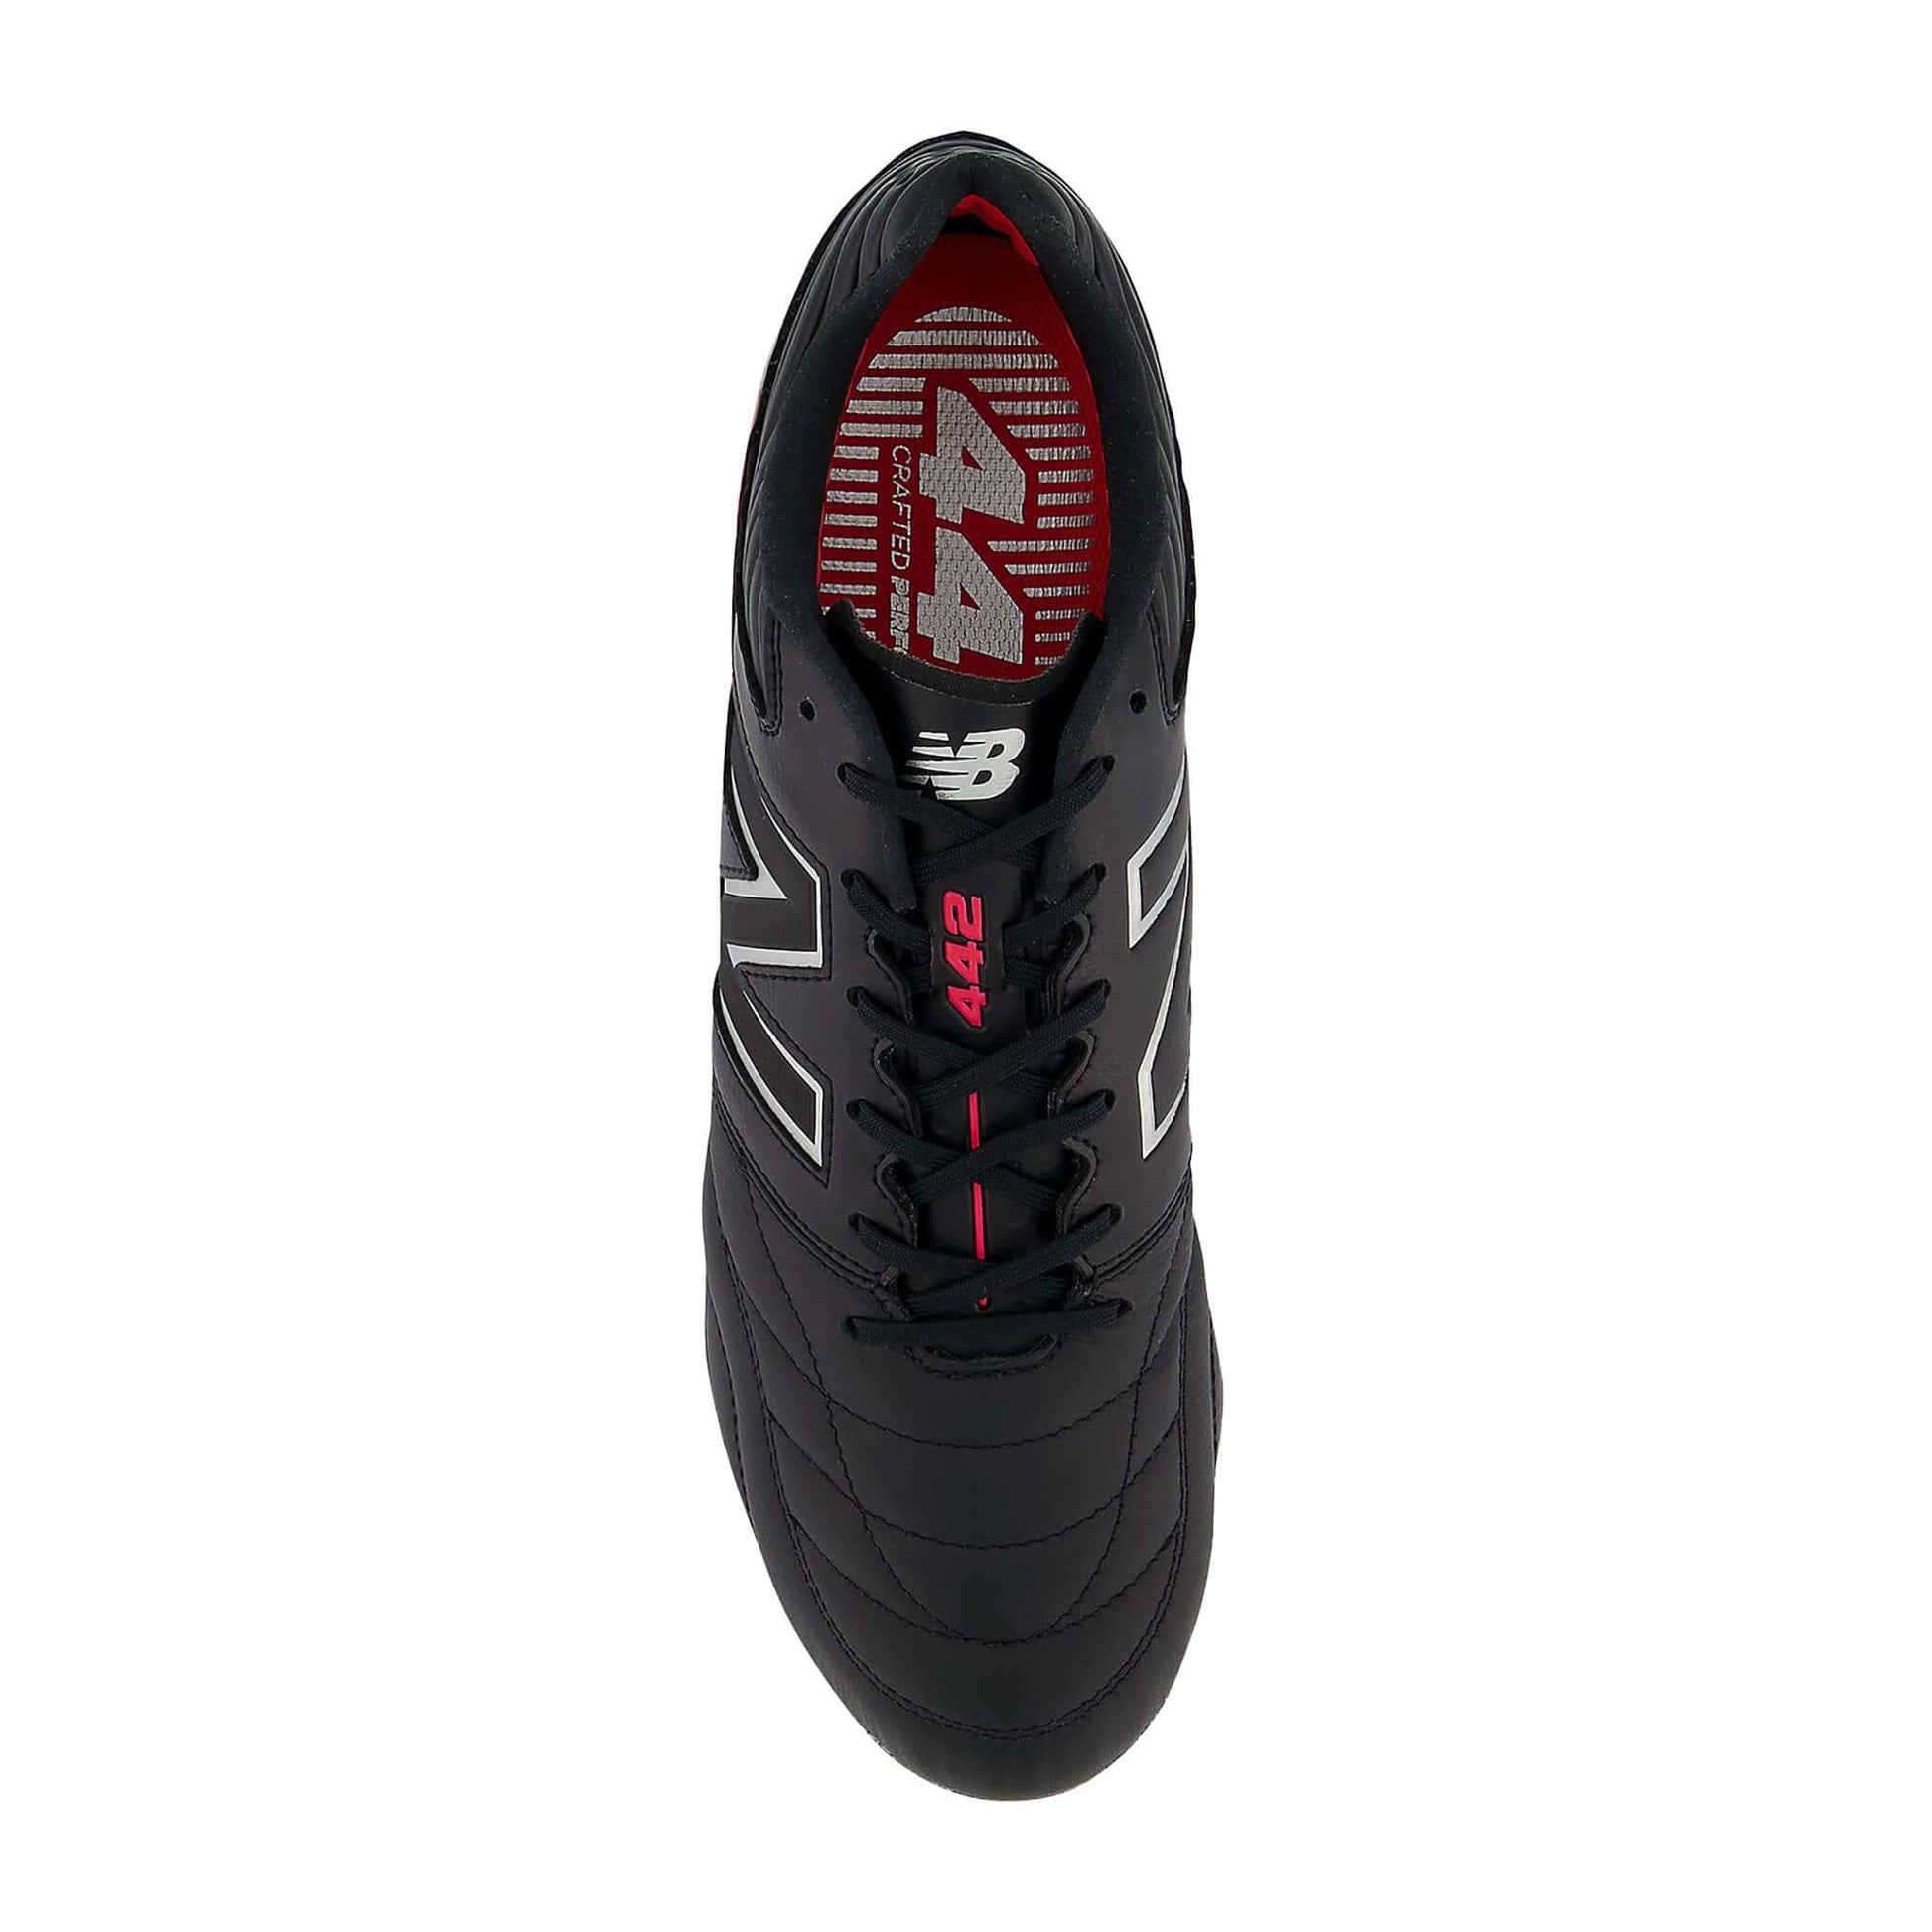 442 v2 Pro Regular Fit Firm Ground Cleats | EvangelistaSports.com | Canada's Premiere Soccer Store